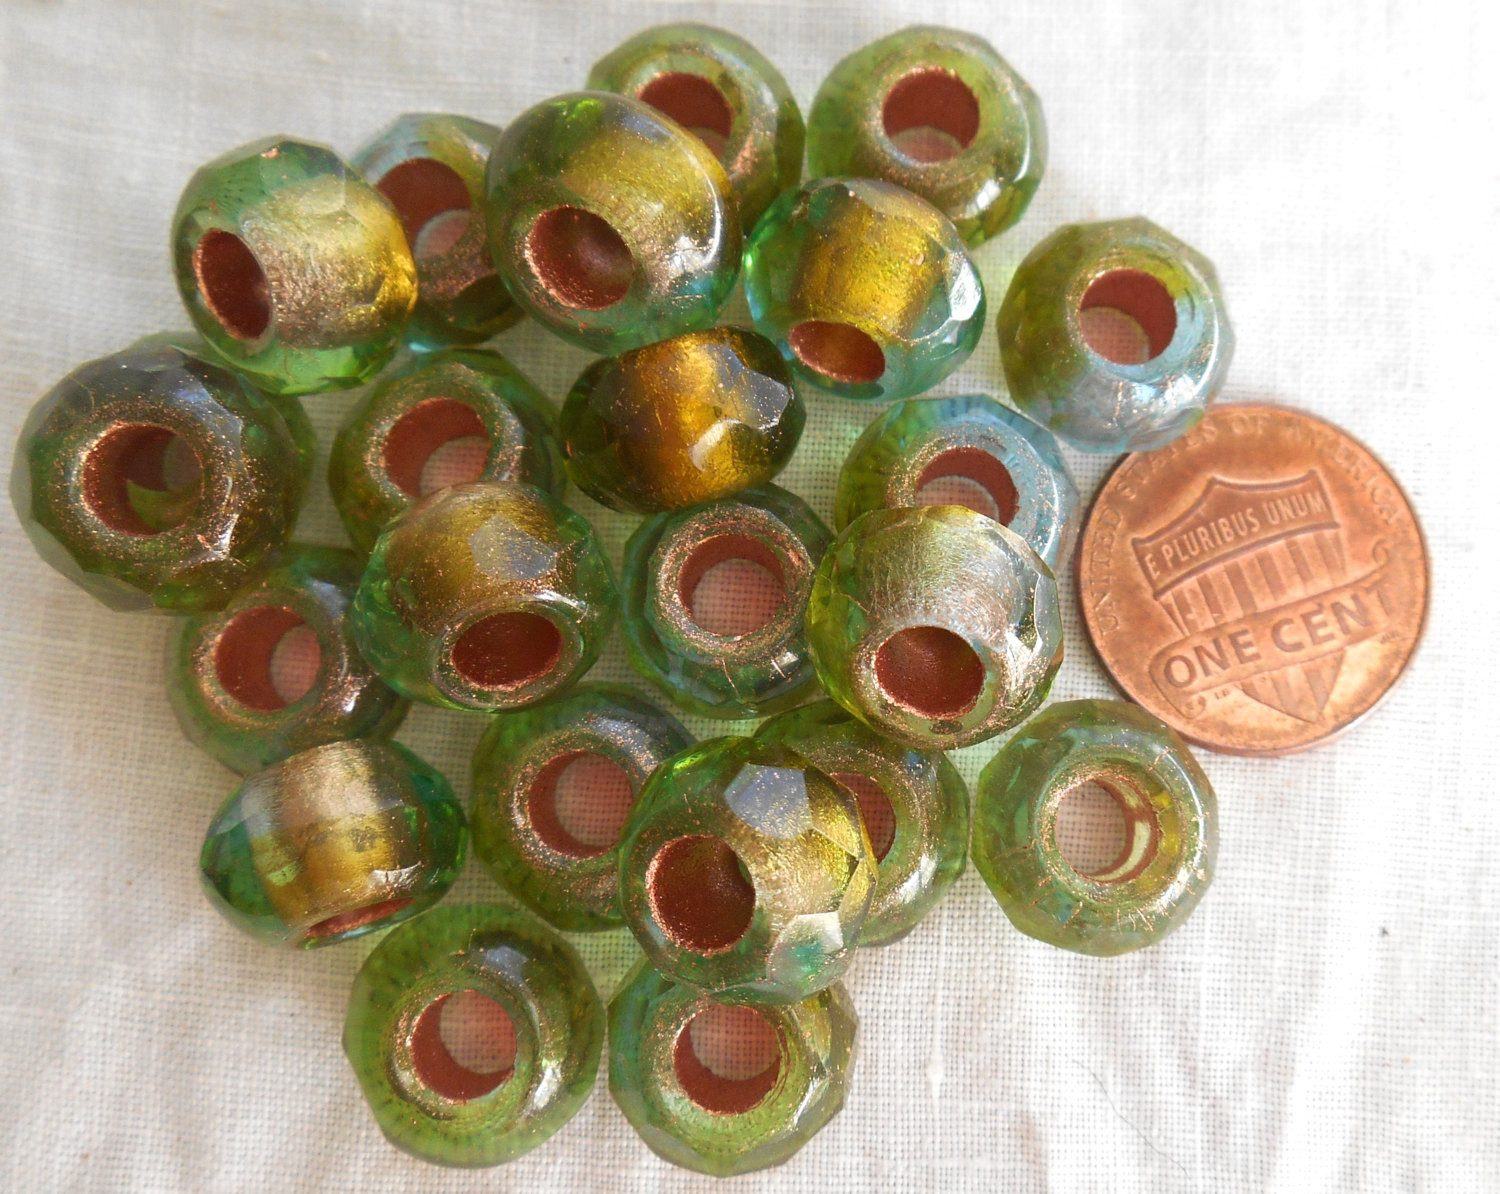 Big Hole Roller Czech Glass Rondelle Forest Copper Lined 8x5mm 25 Glass  Beads Per Strand